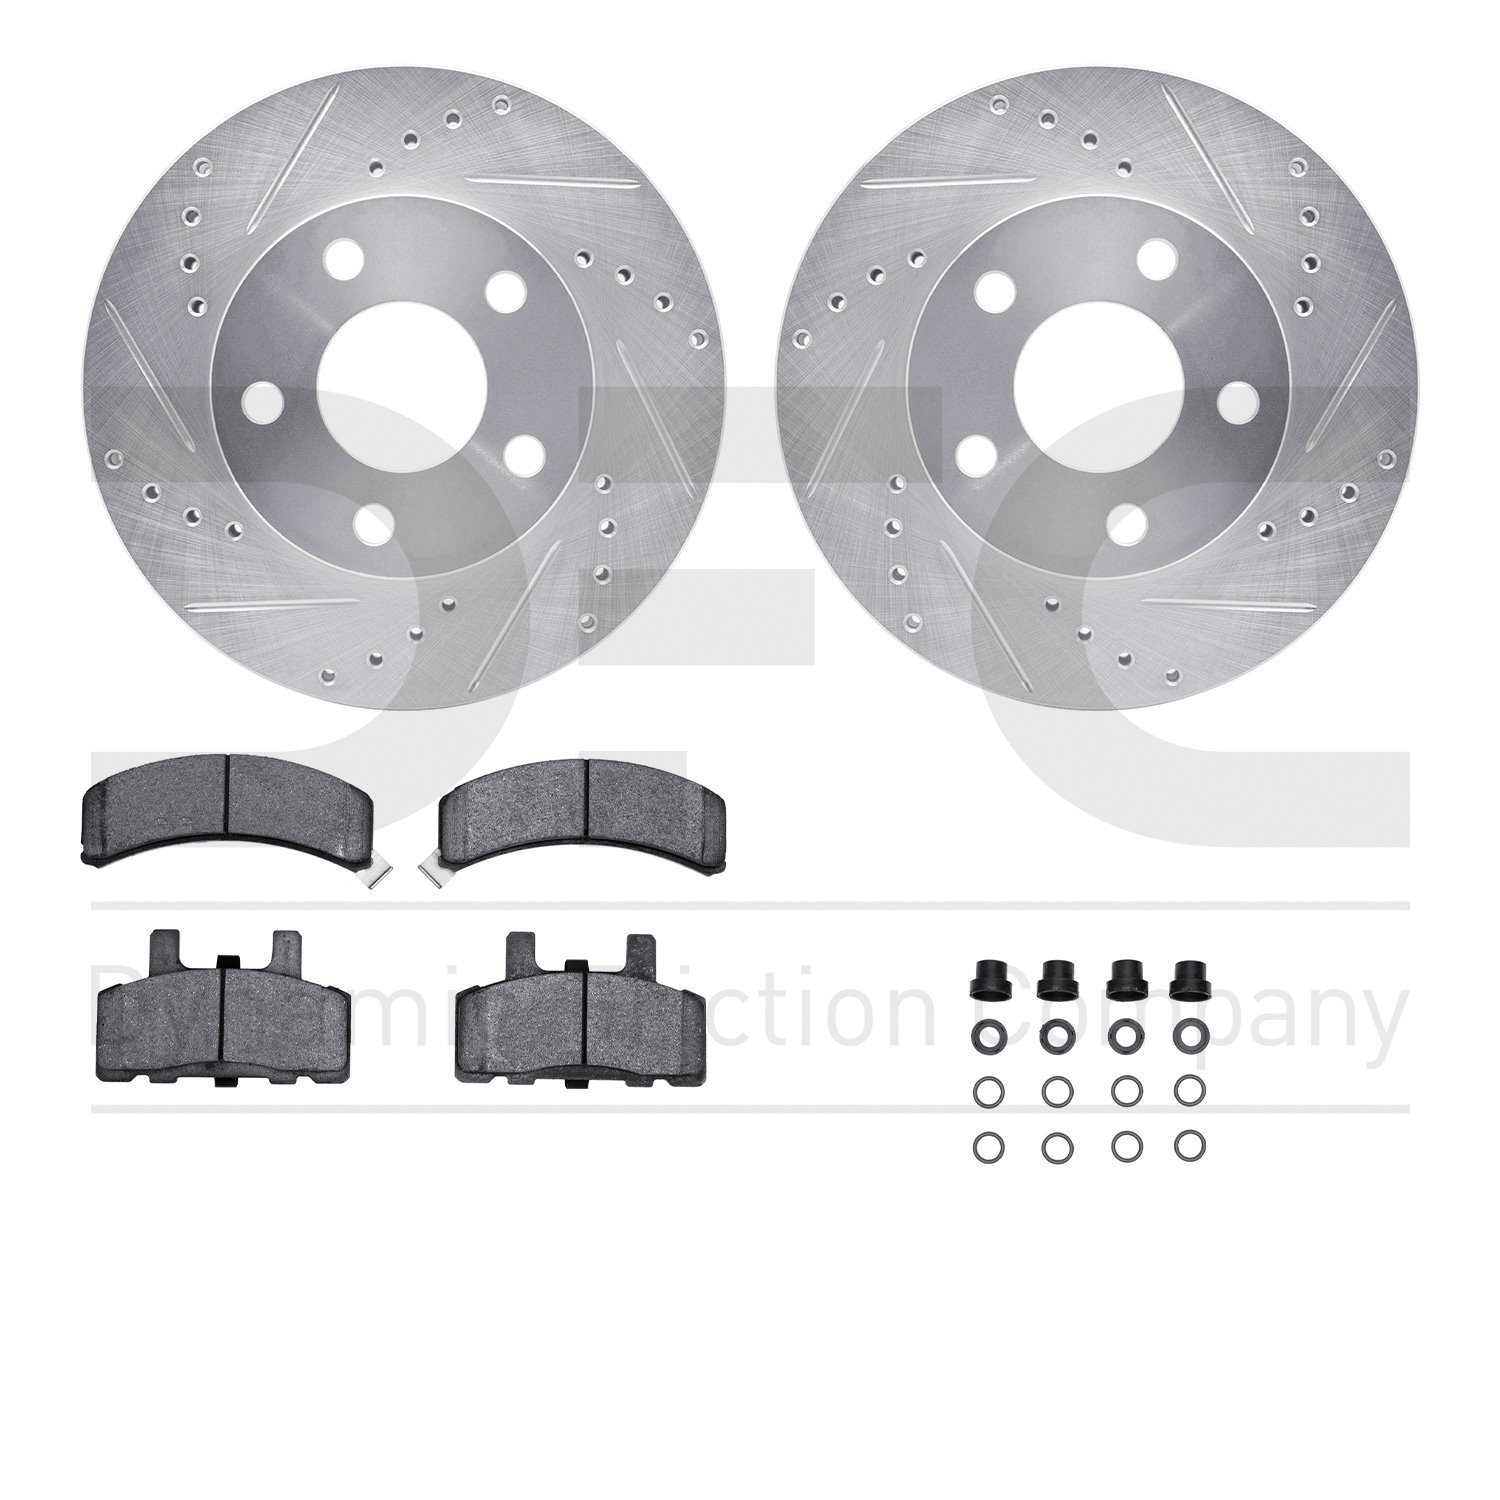 7412-47007 Drilled/Slotted Brake Rotors with Ultimate-Duty Brake Pads Kit & Hardware [Silver], 1990-1993 GM, Position: Front